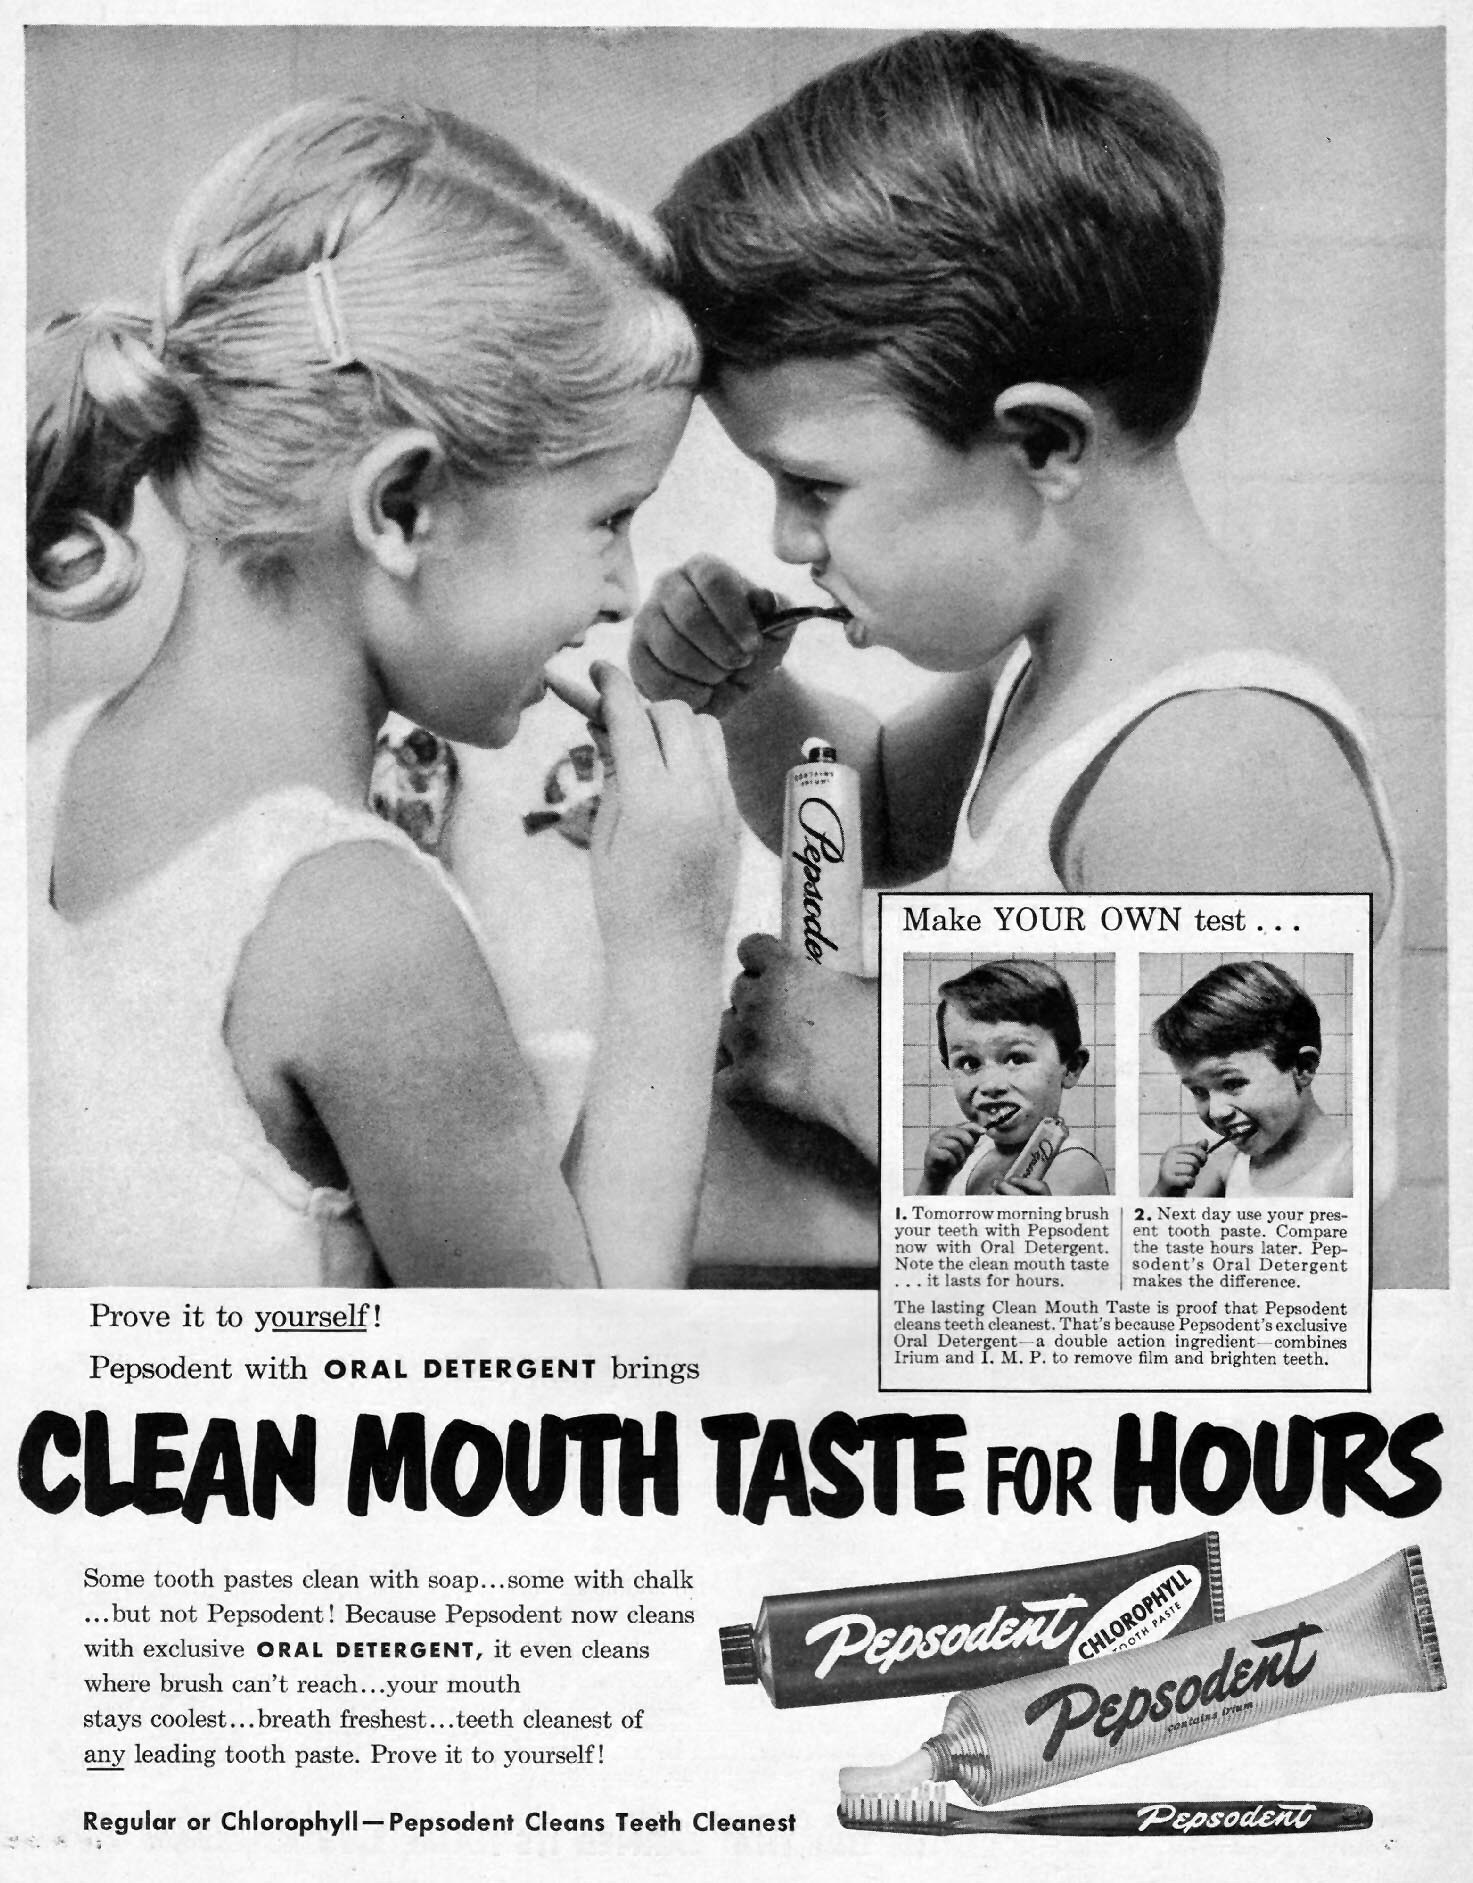 PEPSODENT TOOTHPASTE
LIFE
10/13/1952
p. 2